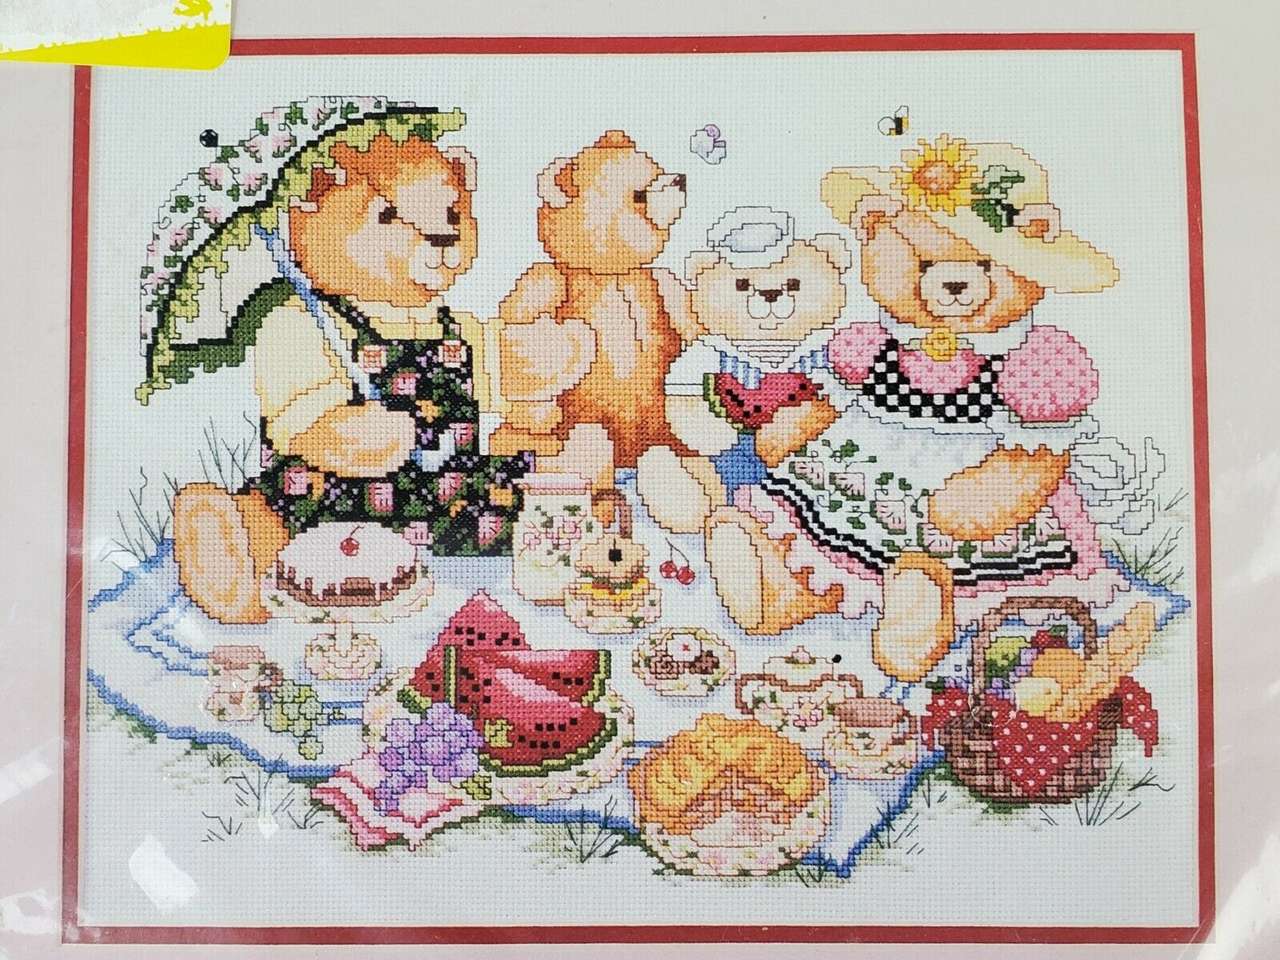 Teddy Bear Picnic. puzzle online